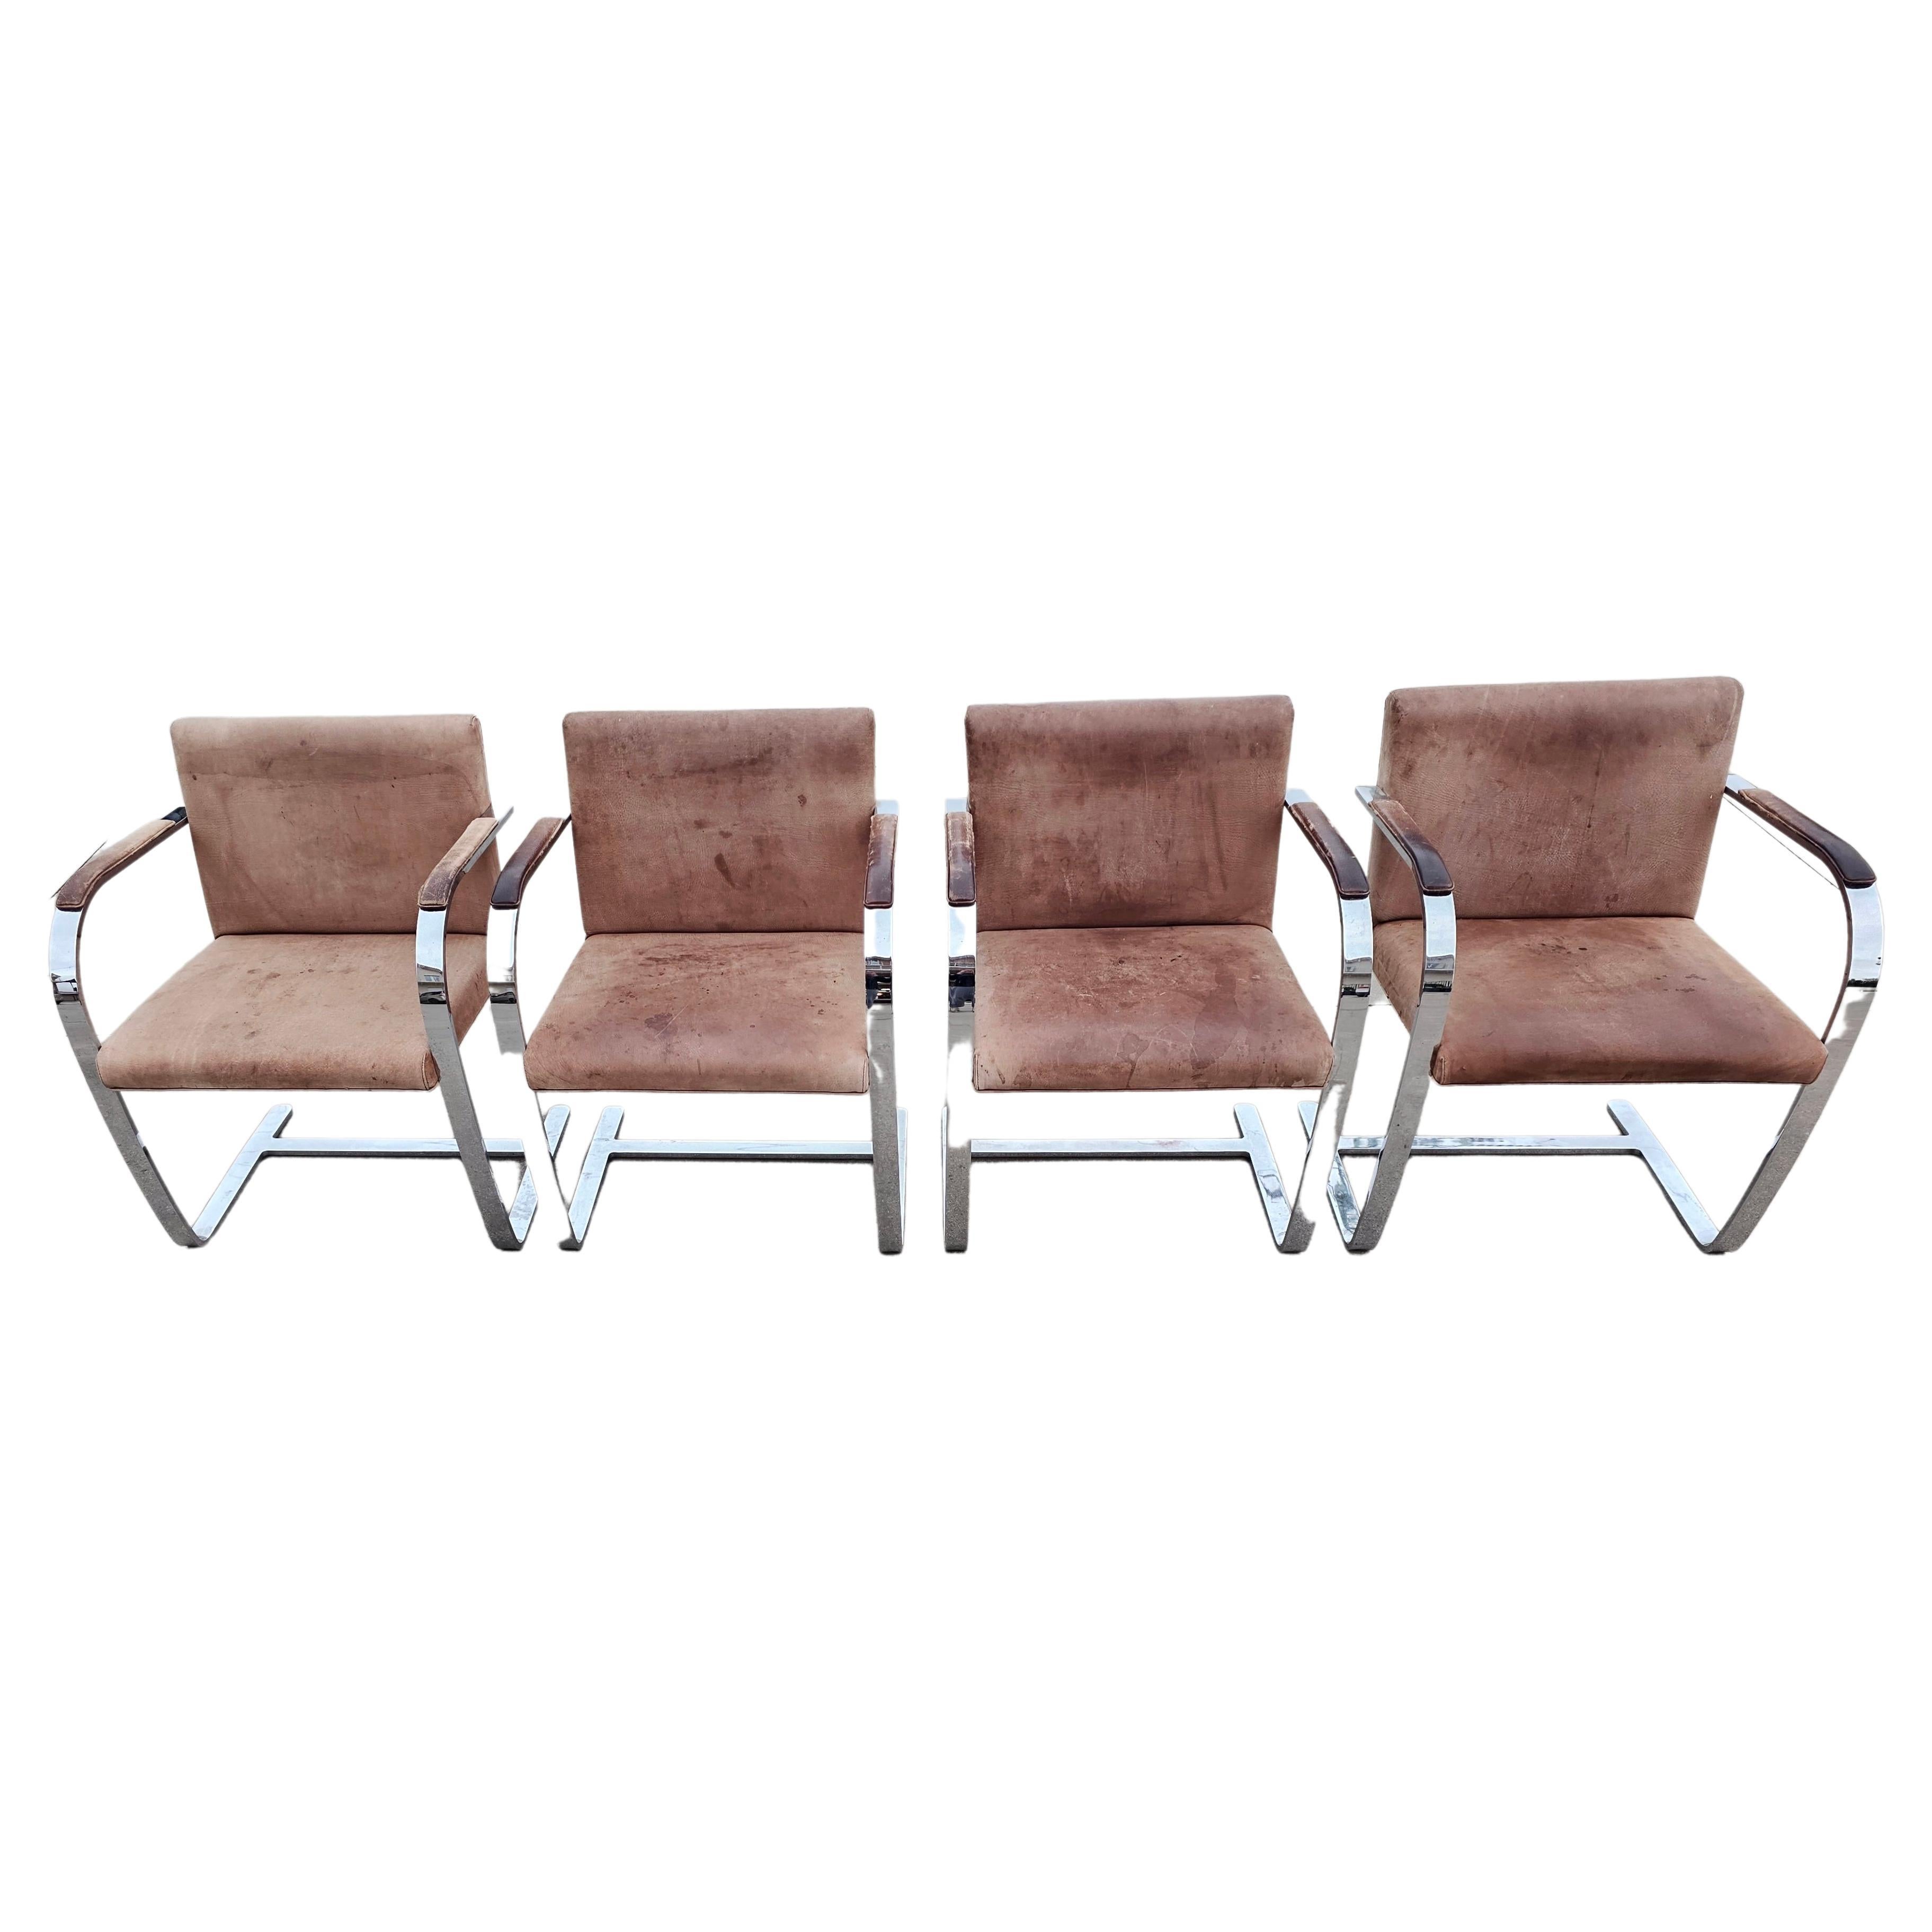 Set of 4 Vintage Brno Chairs Flat Bar 255 by Ludwig Mies van der Rohe